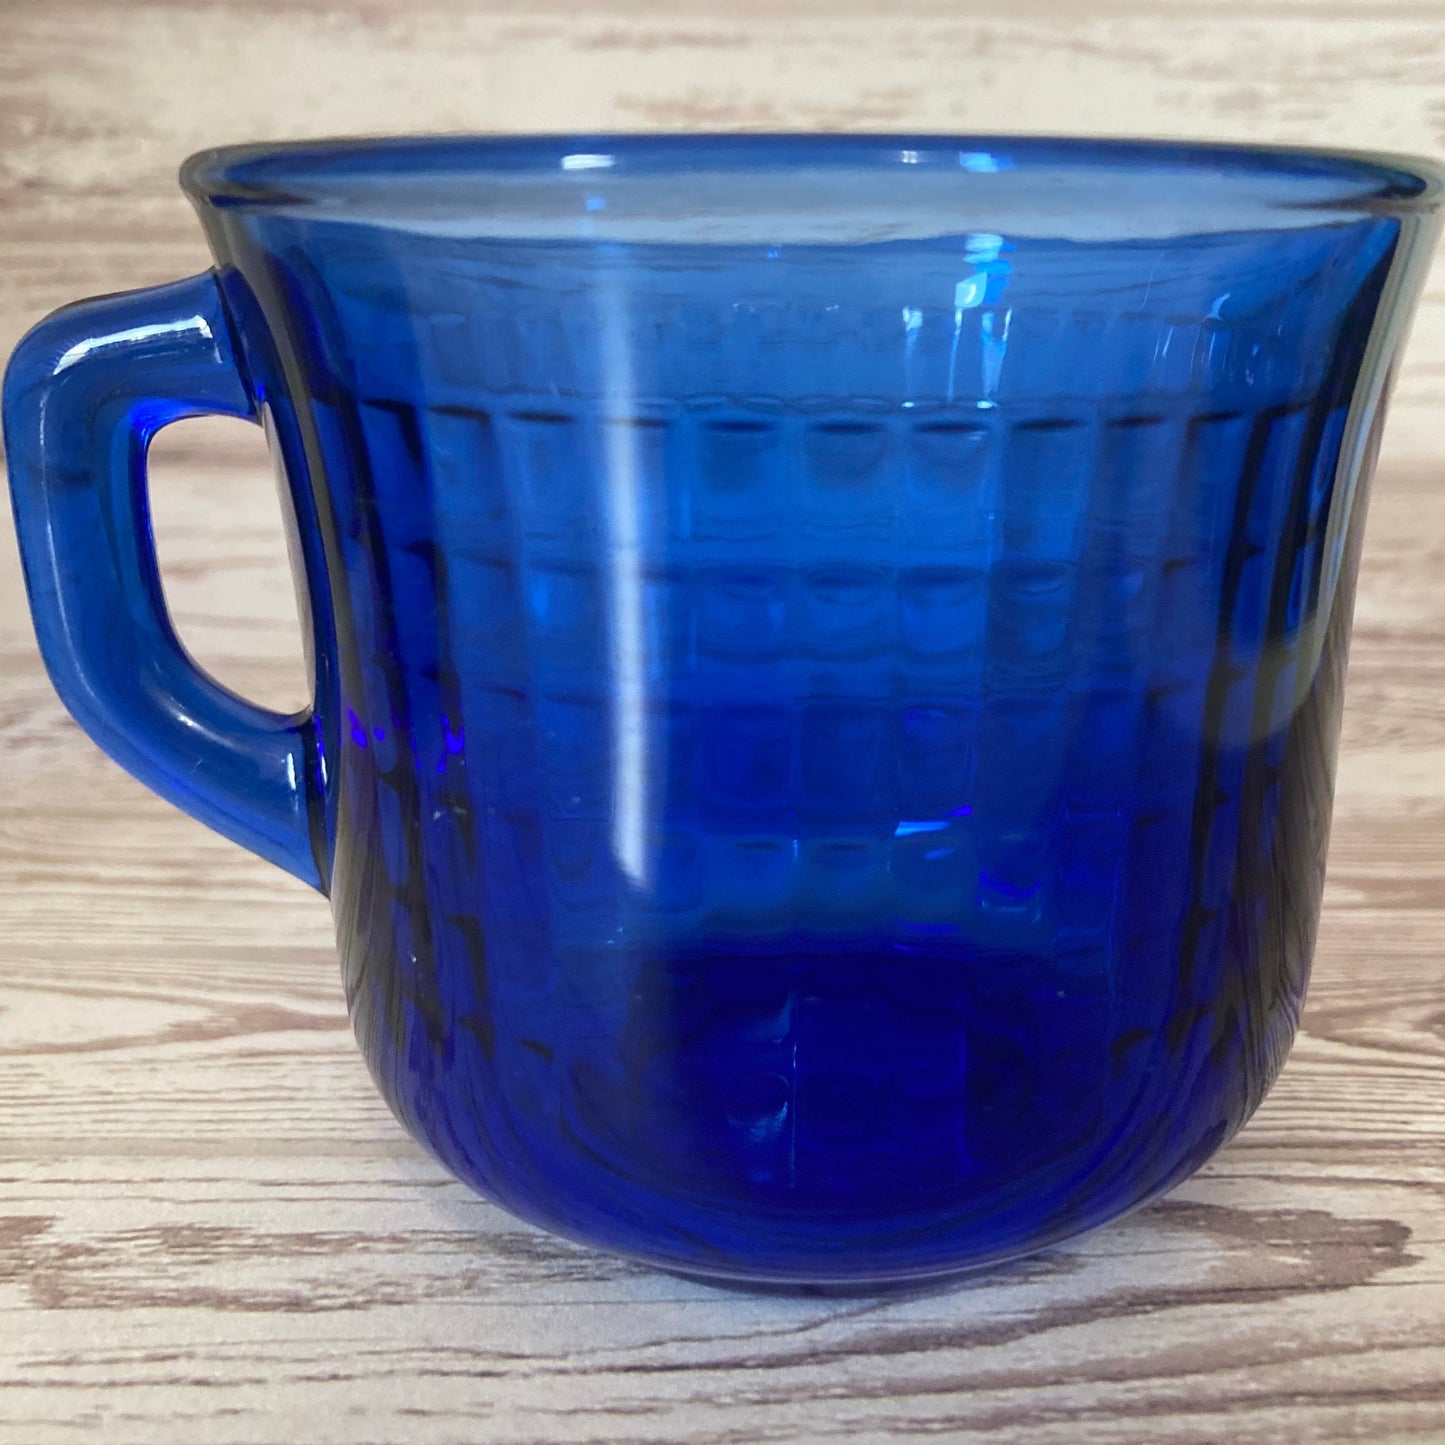 Drink Ware - Blue Glass Mug Pair from Mexico